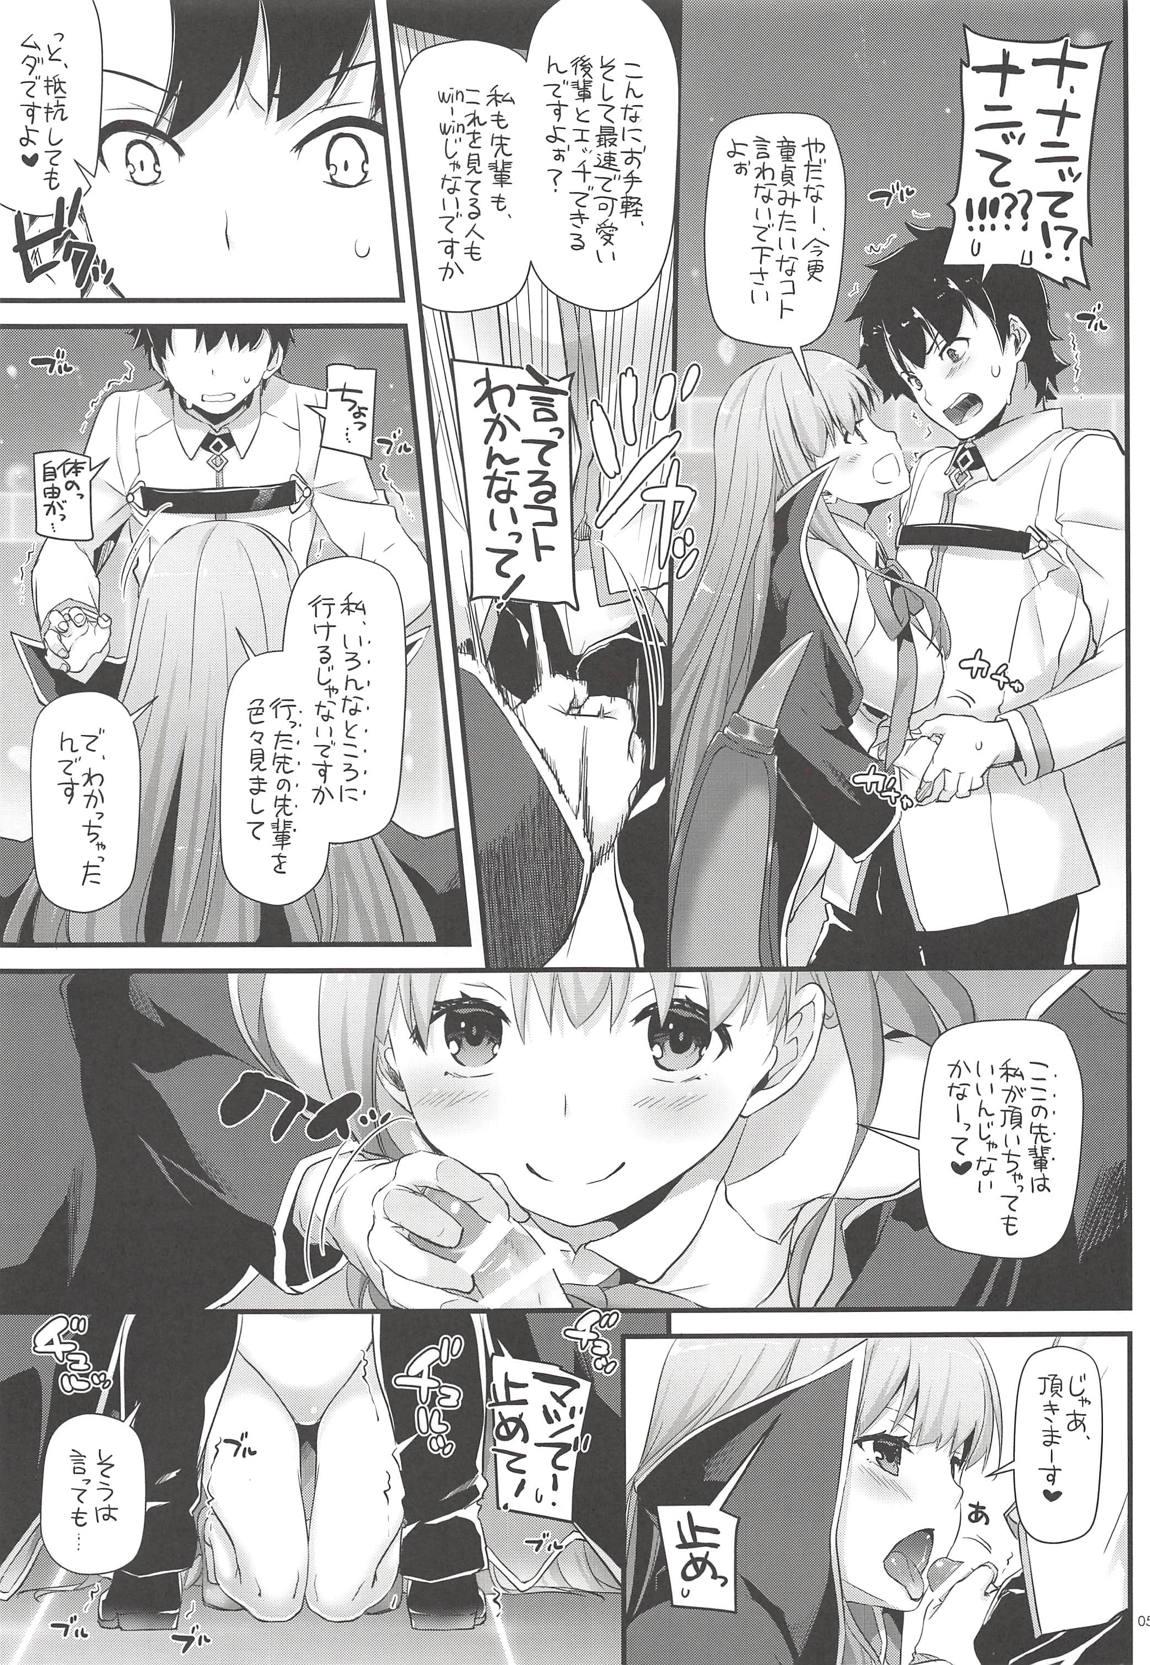 Ejaculations D.L. action 124 - Fate grand order Selfie - Page 4